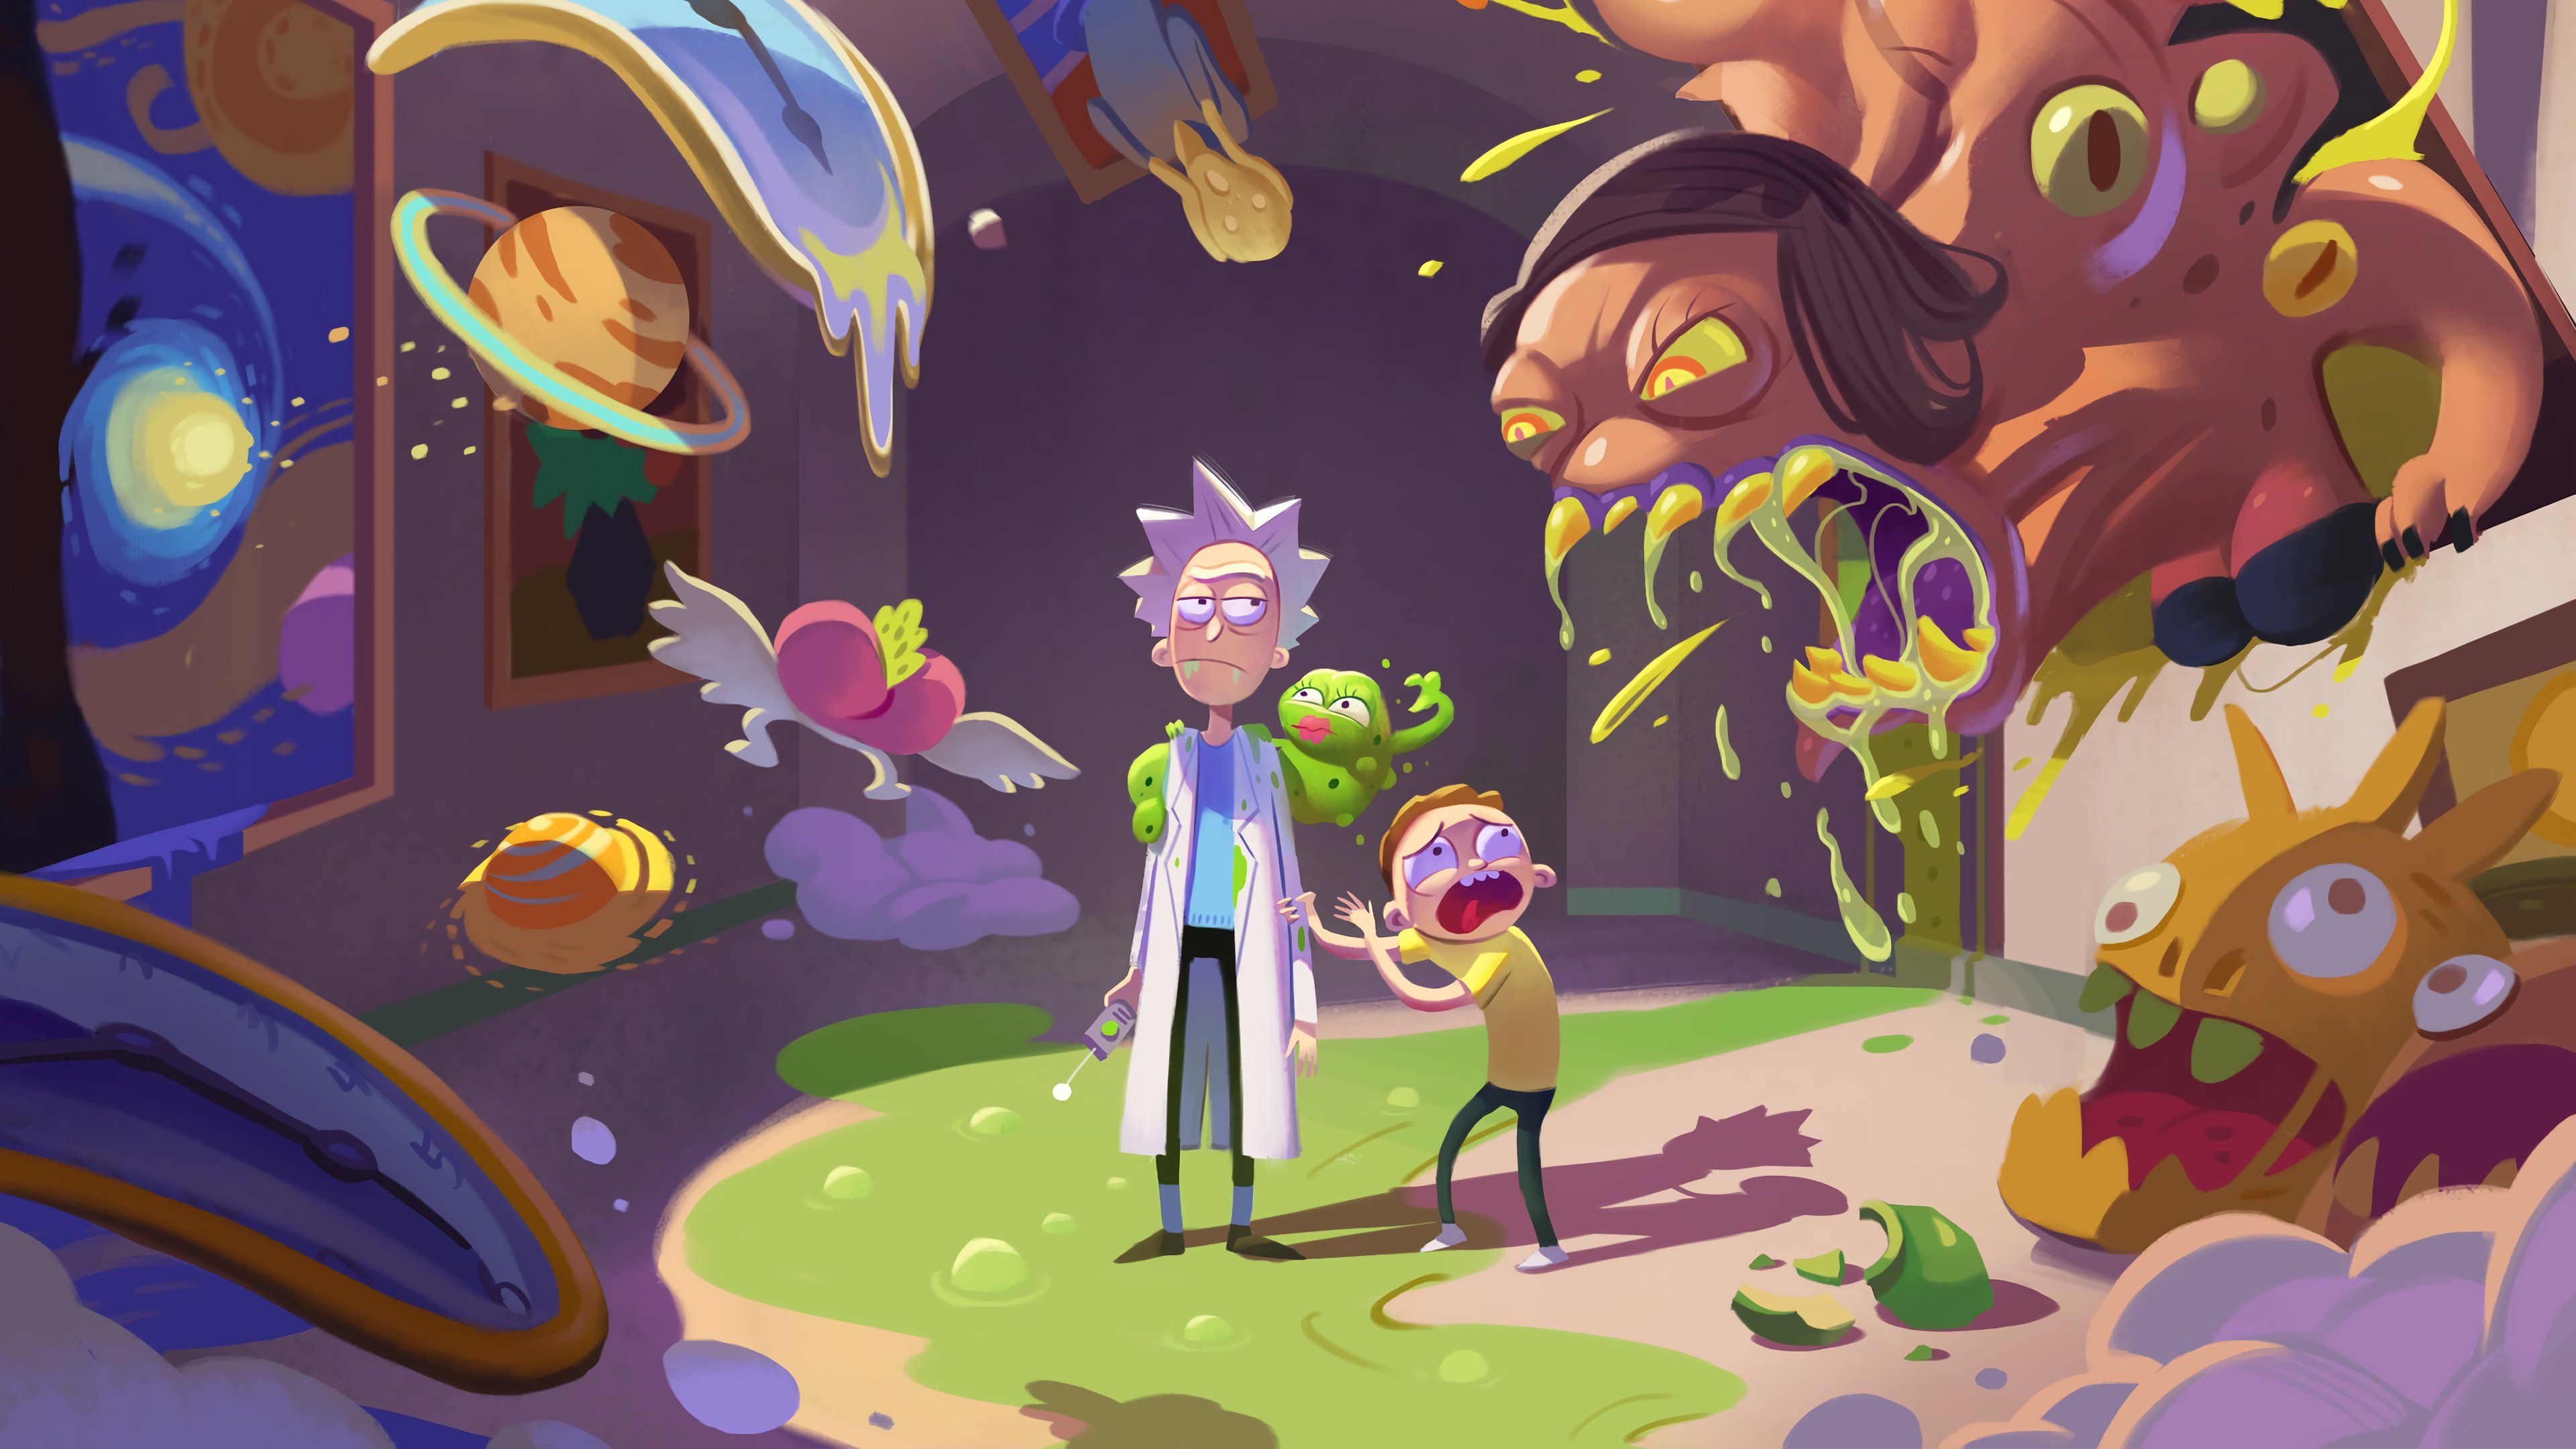 Wallpaper minimal, doctor, rick and morty desktop wallpaper, hd image,  picture, background, 19f6eb